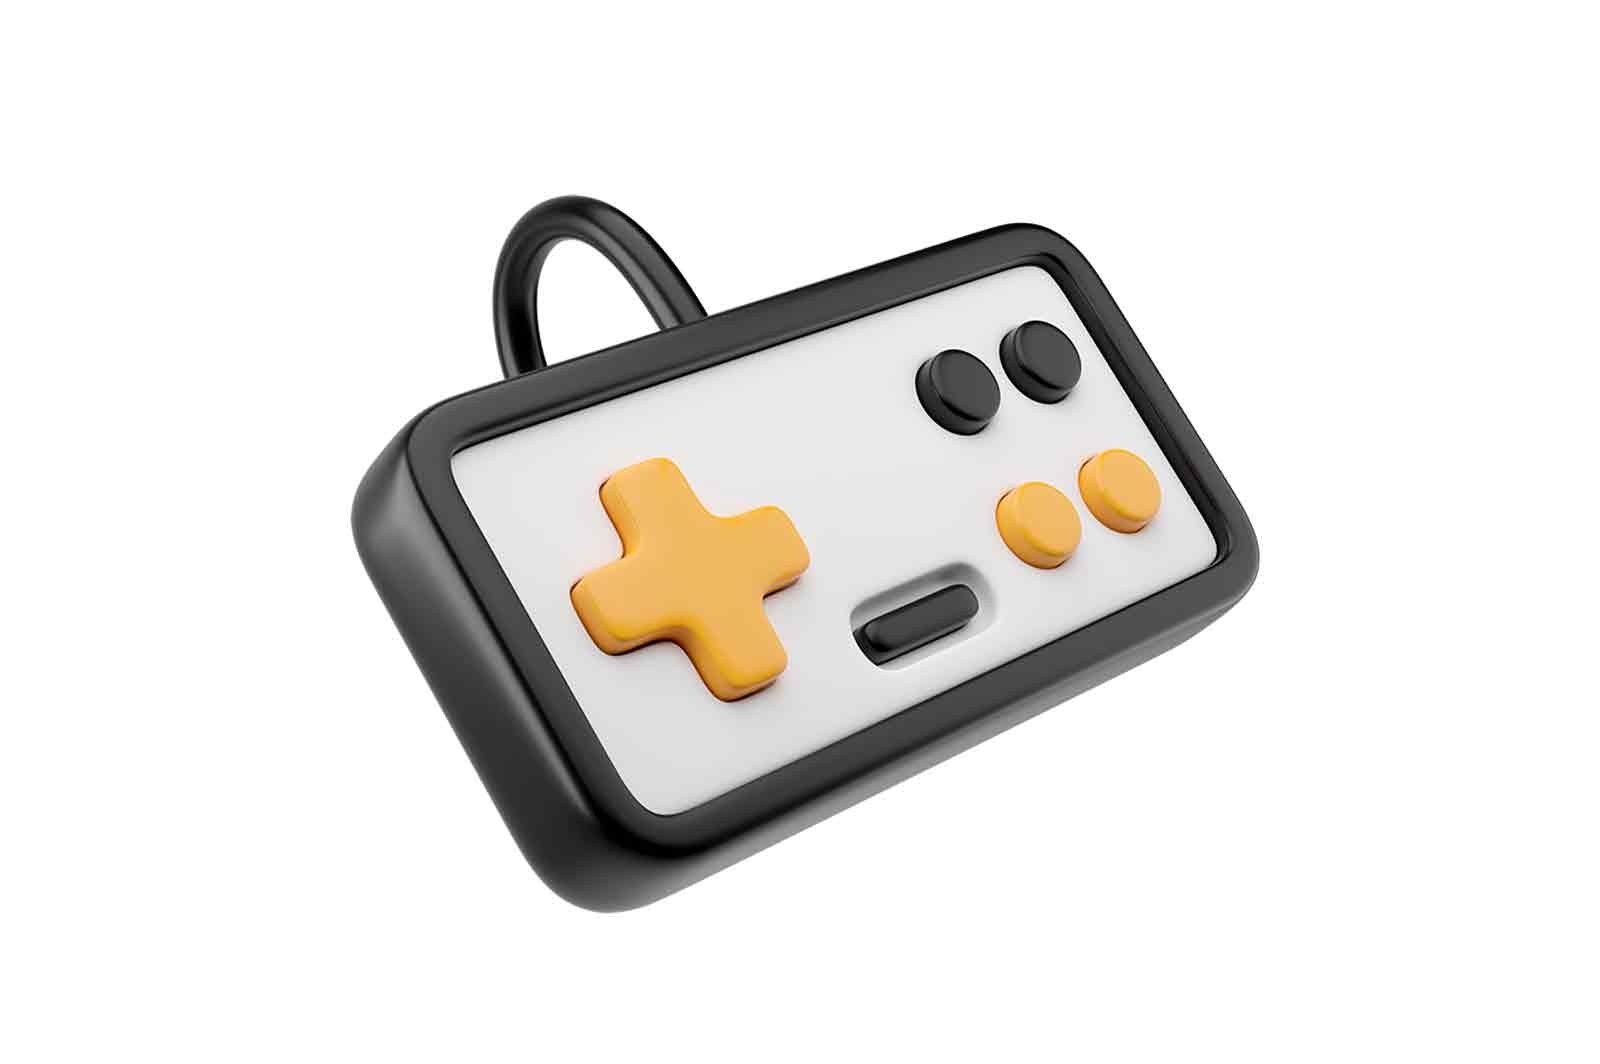 Game controller, 3d rendered illustration, with yellow buttons and black body. Isolated on white background, realistic look.